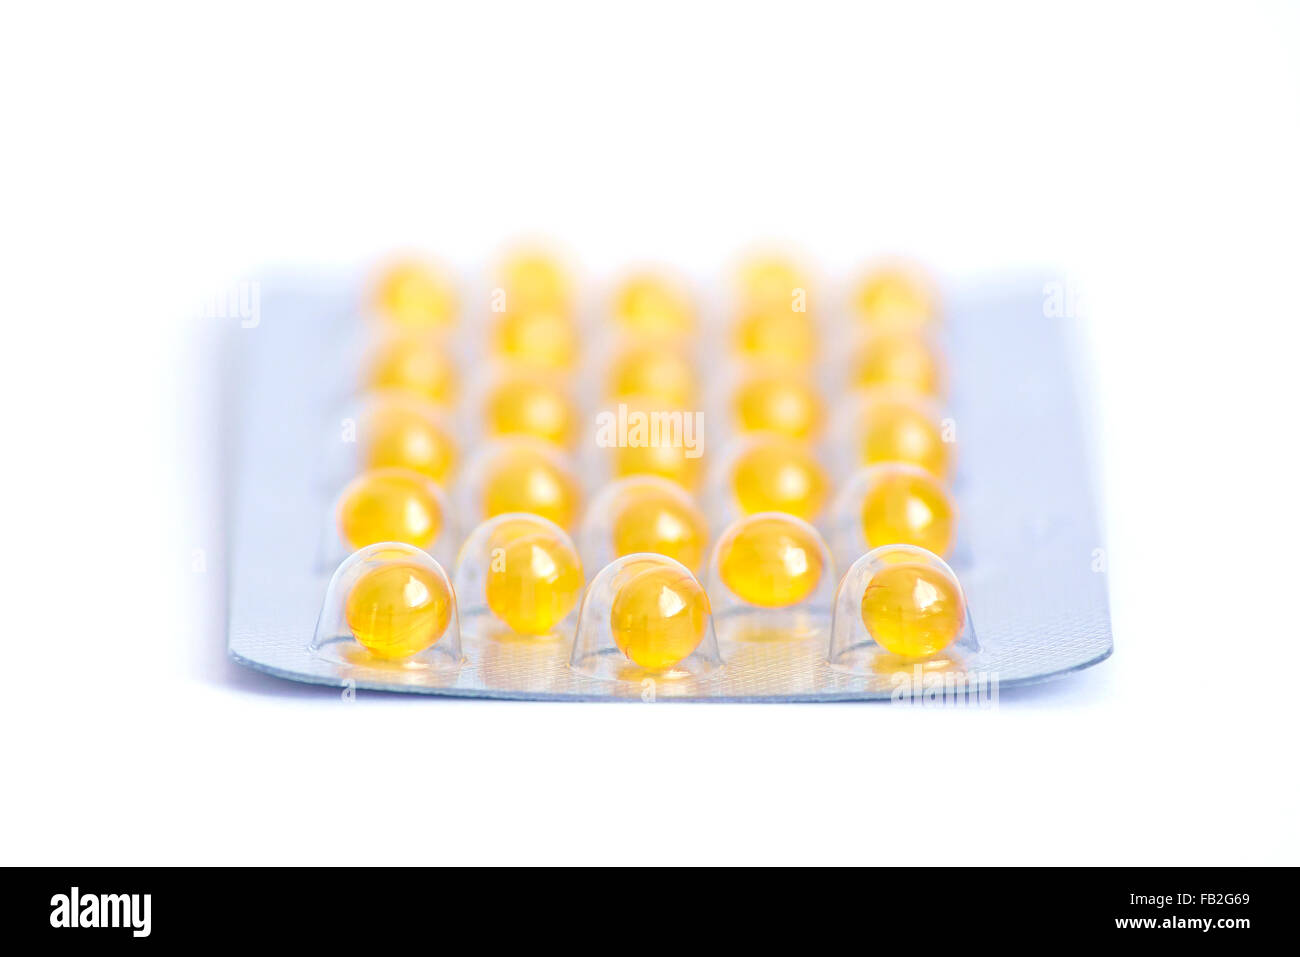 yellow medication in a complete package Stock Photo